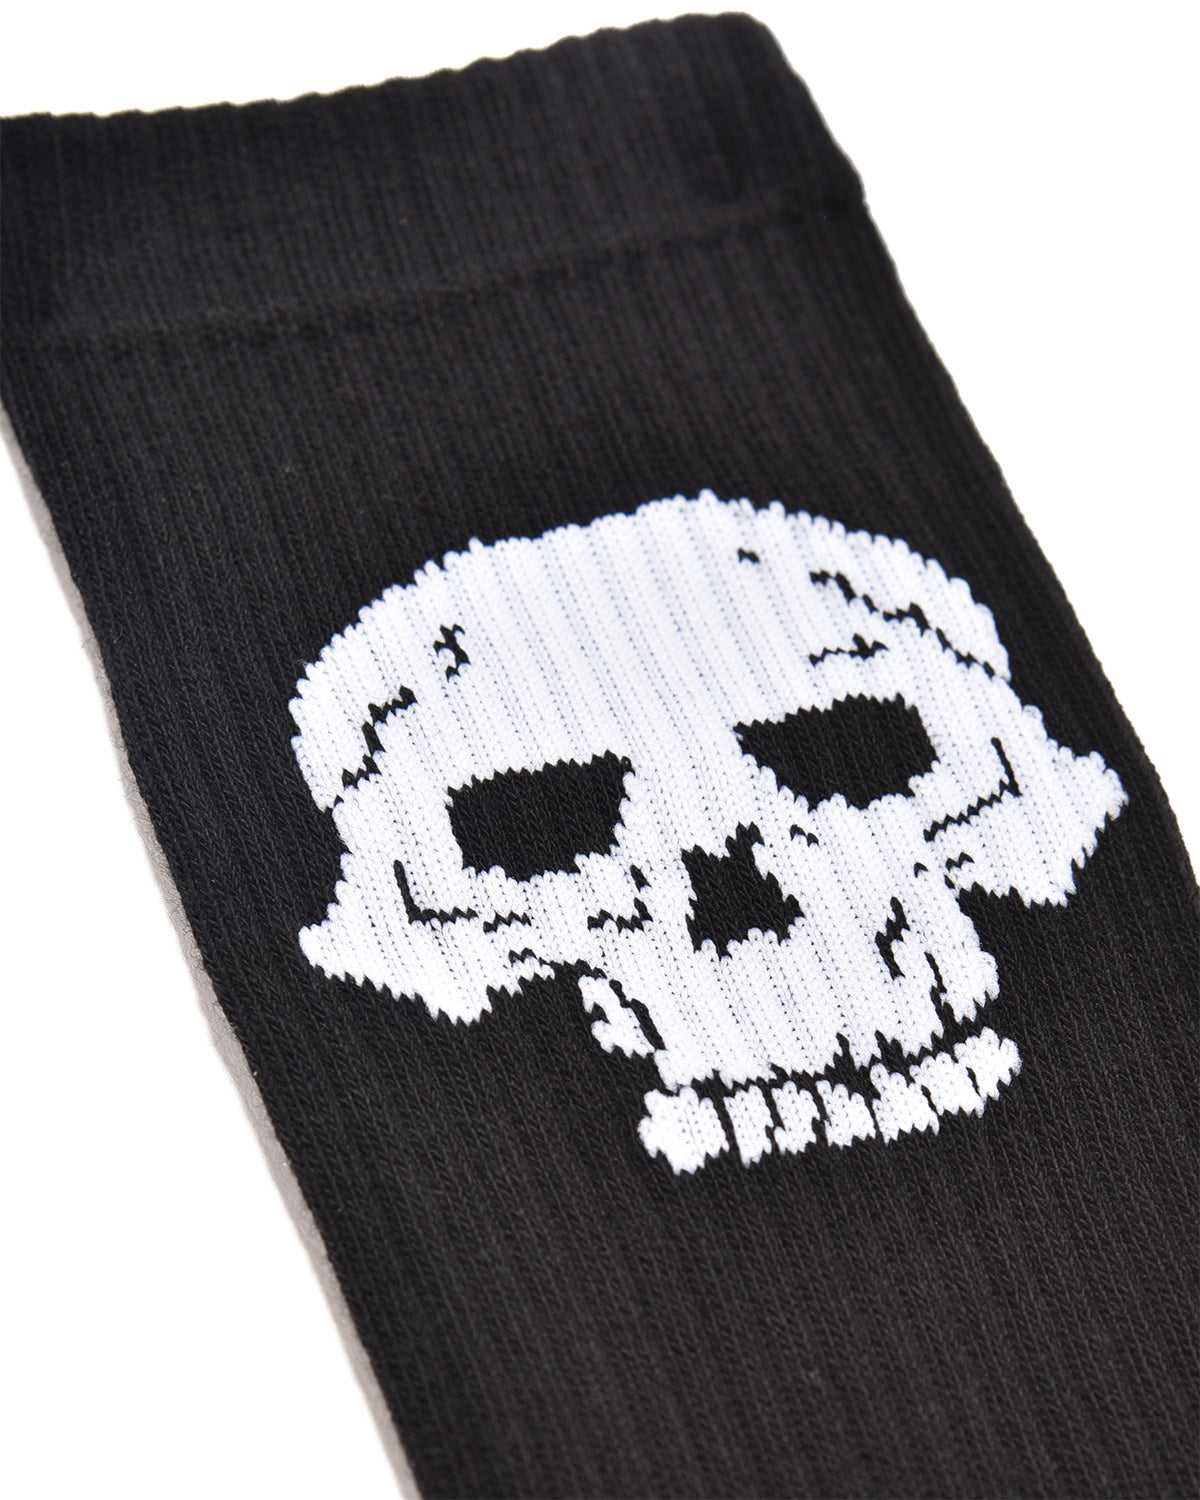 Black Scorpion Bay Socks With White Skull Embroidery